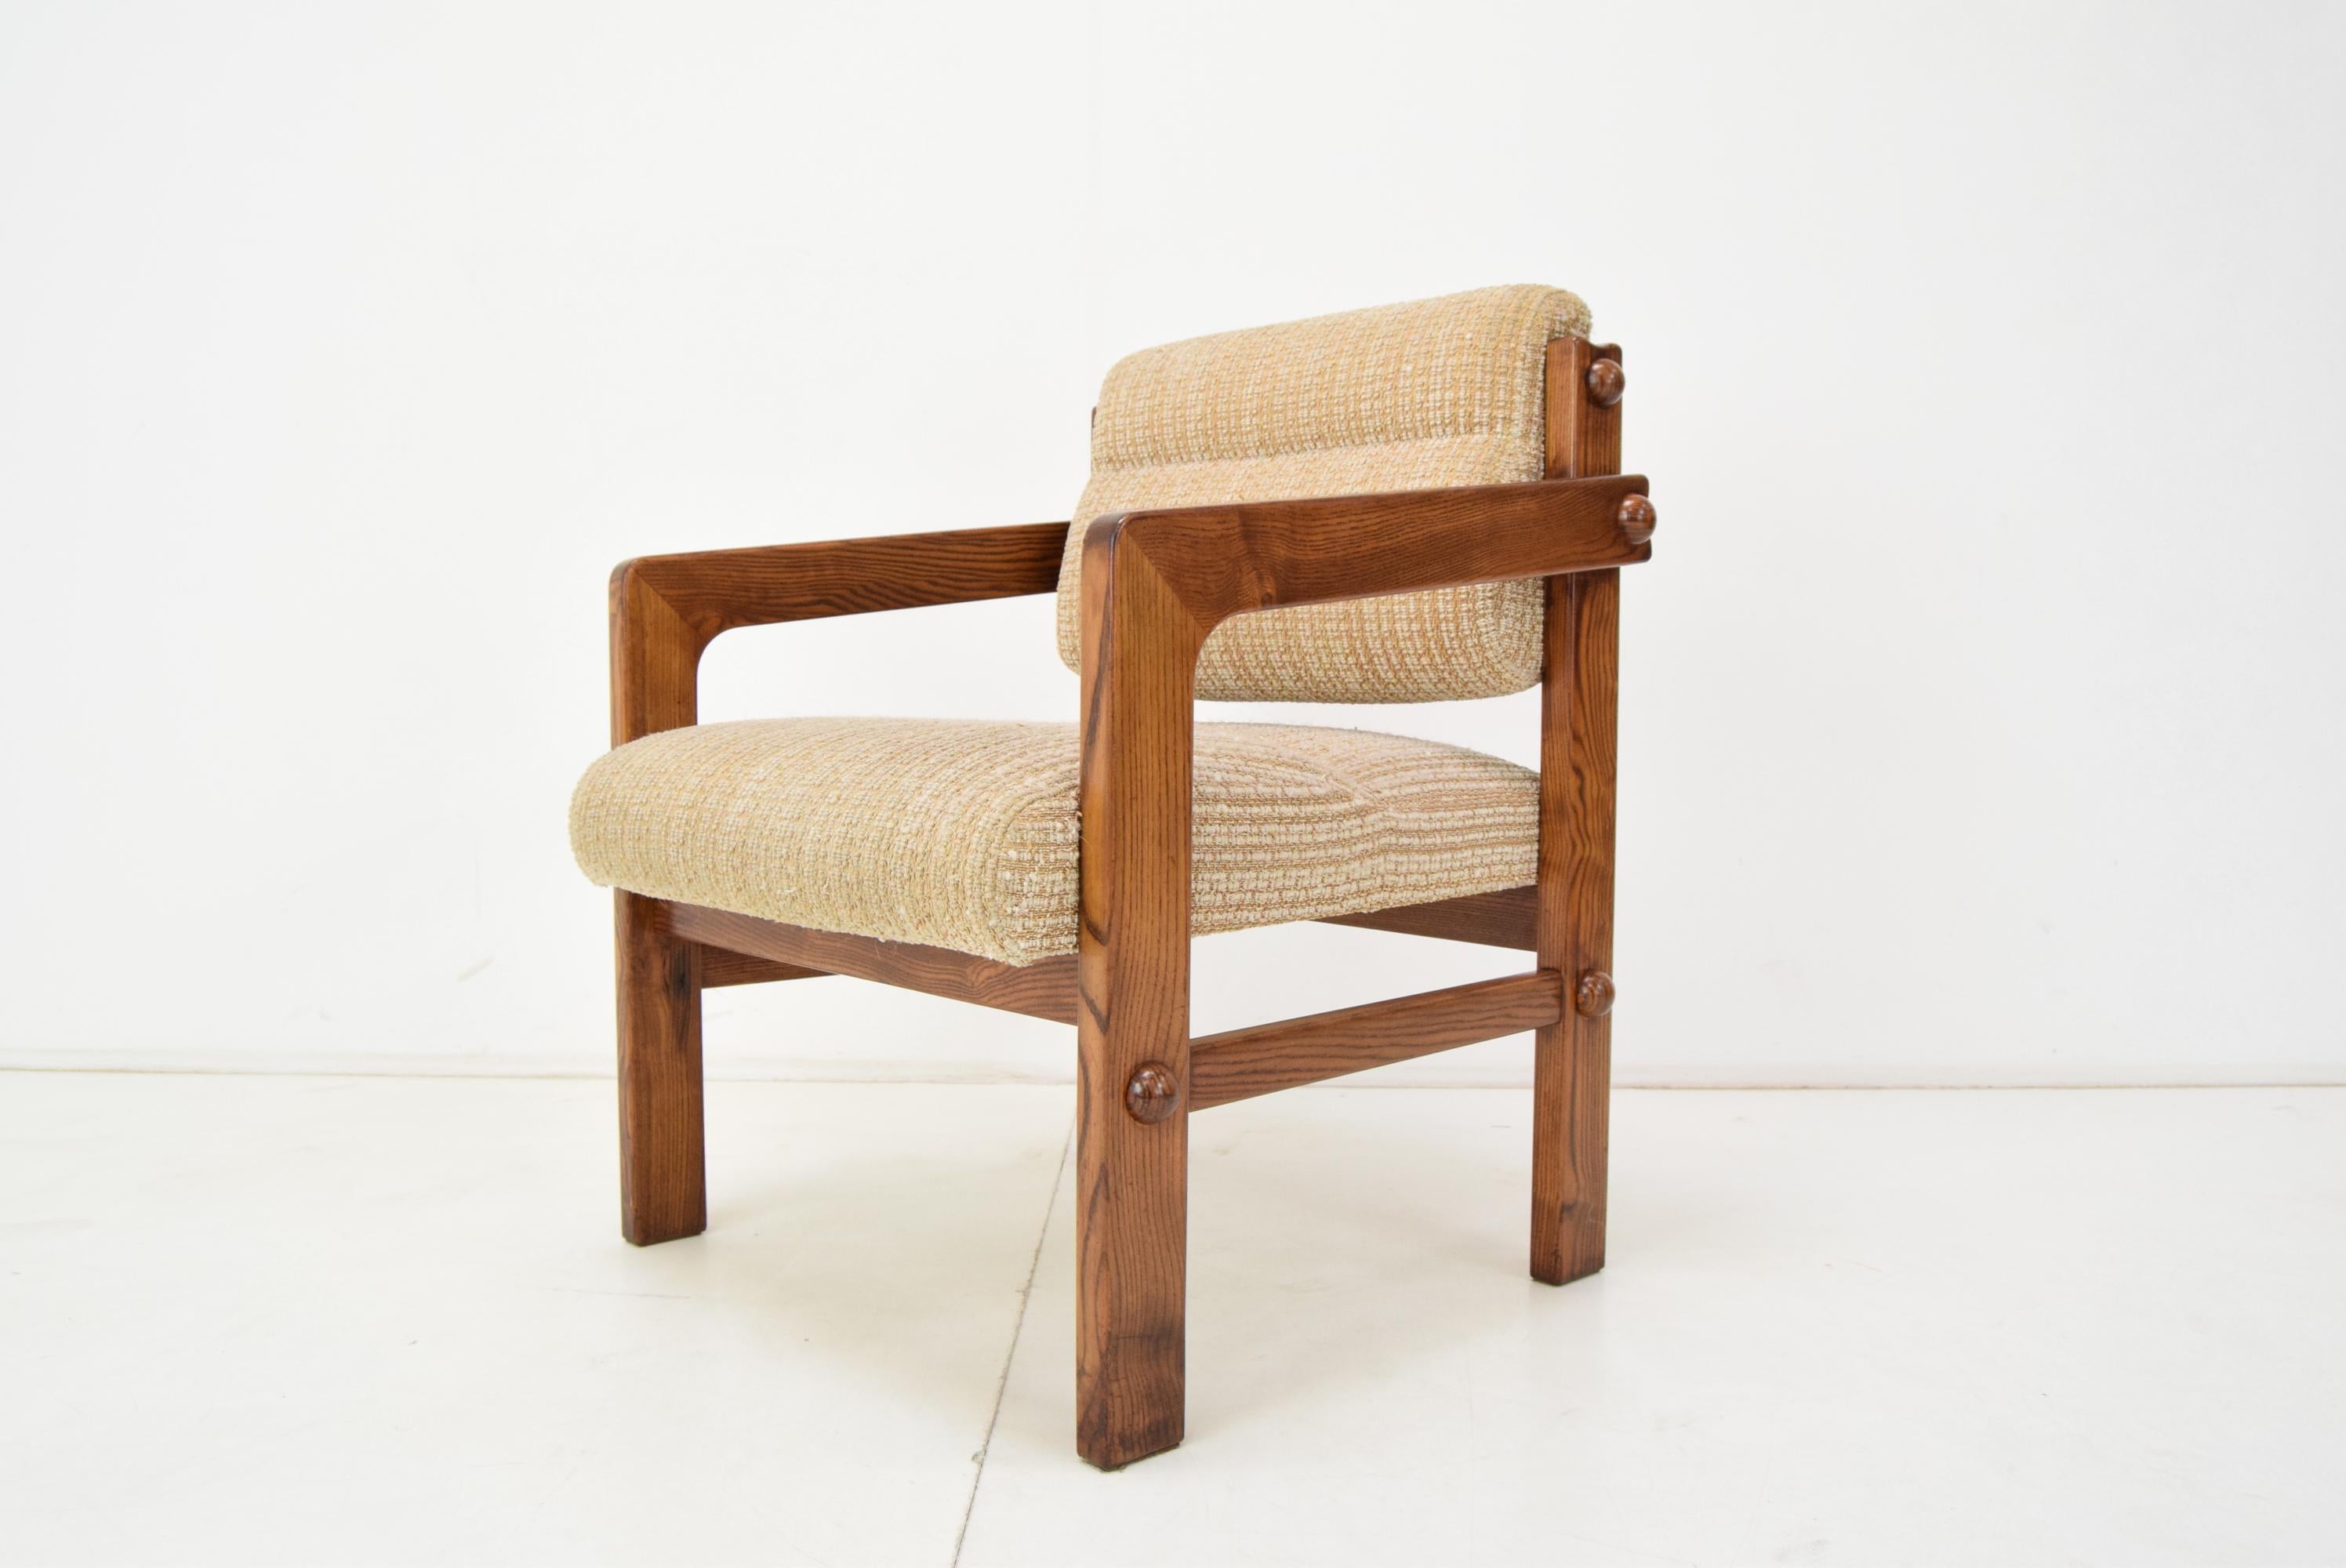 Made of wood, fabric.
Three pieces in stock.
The substance shows signs of use.
The wooden parts have been restored.
Seat height 44cm.
Good original condition.